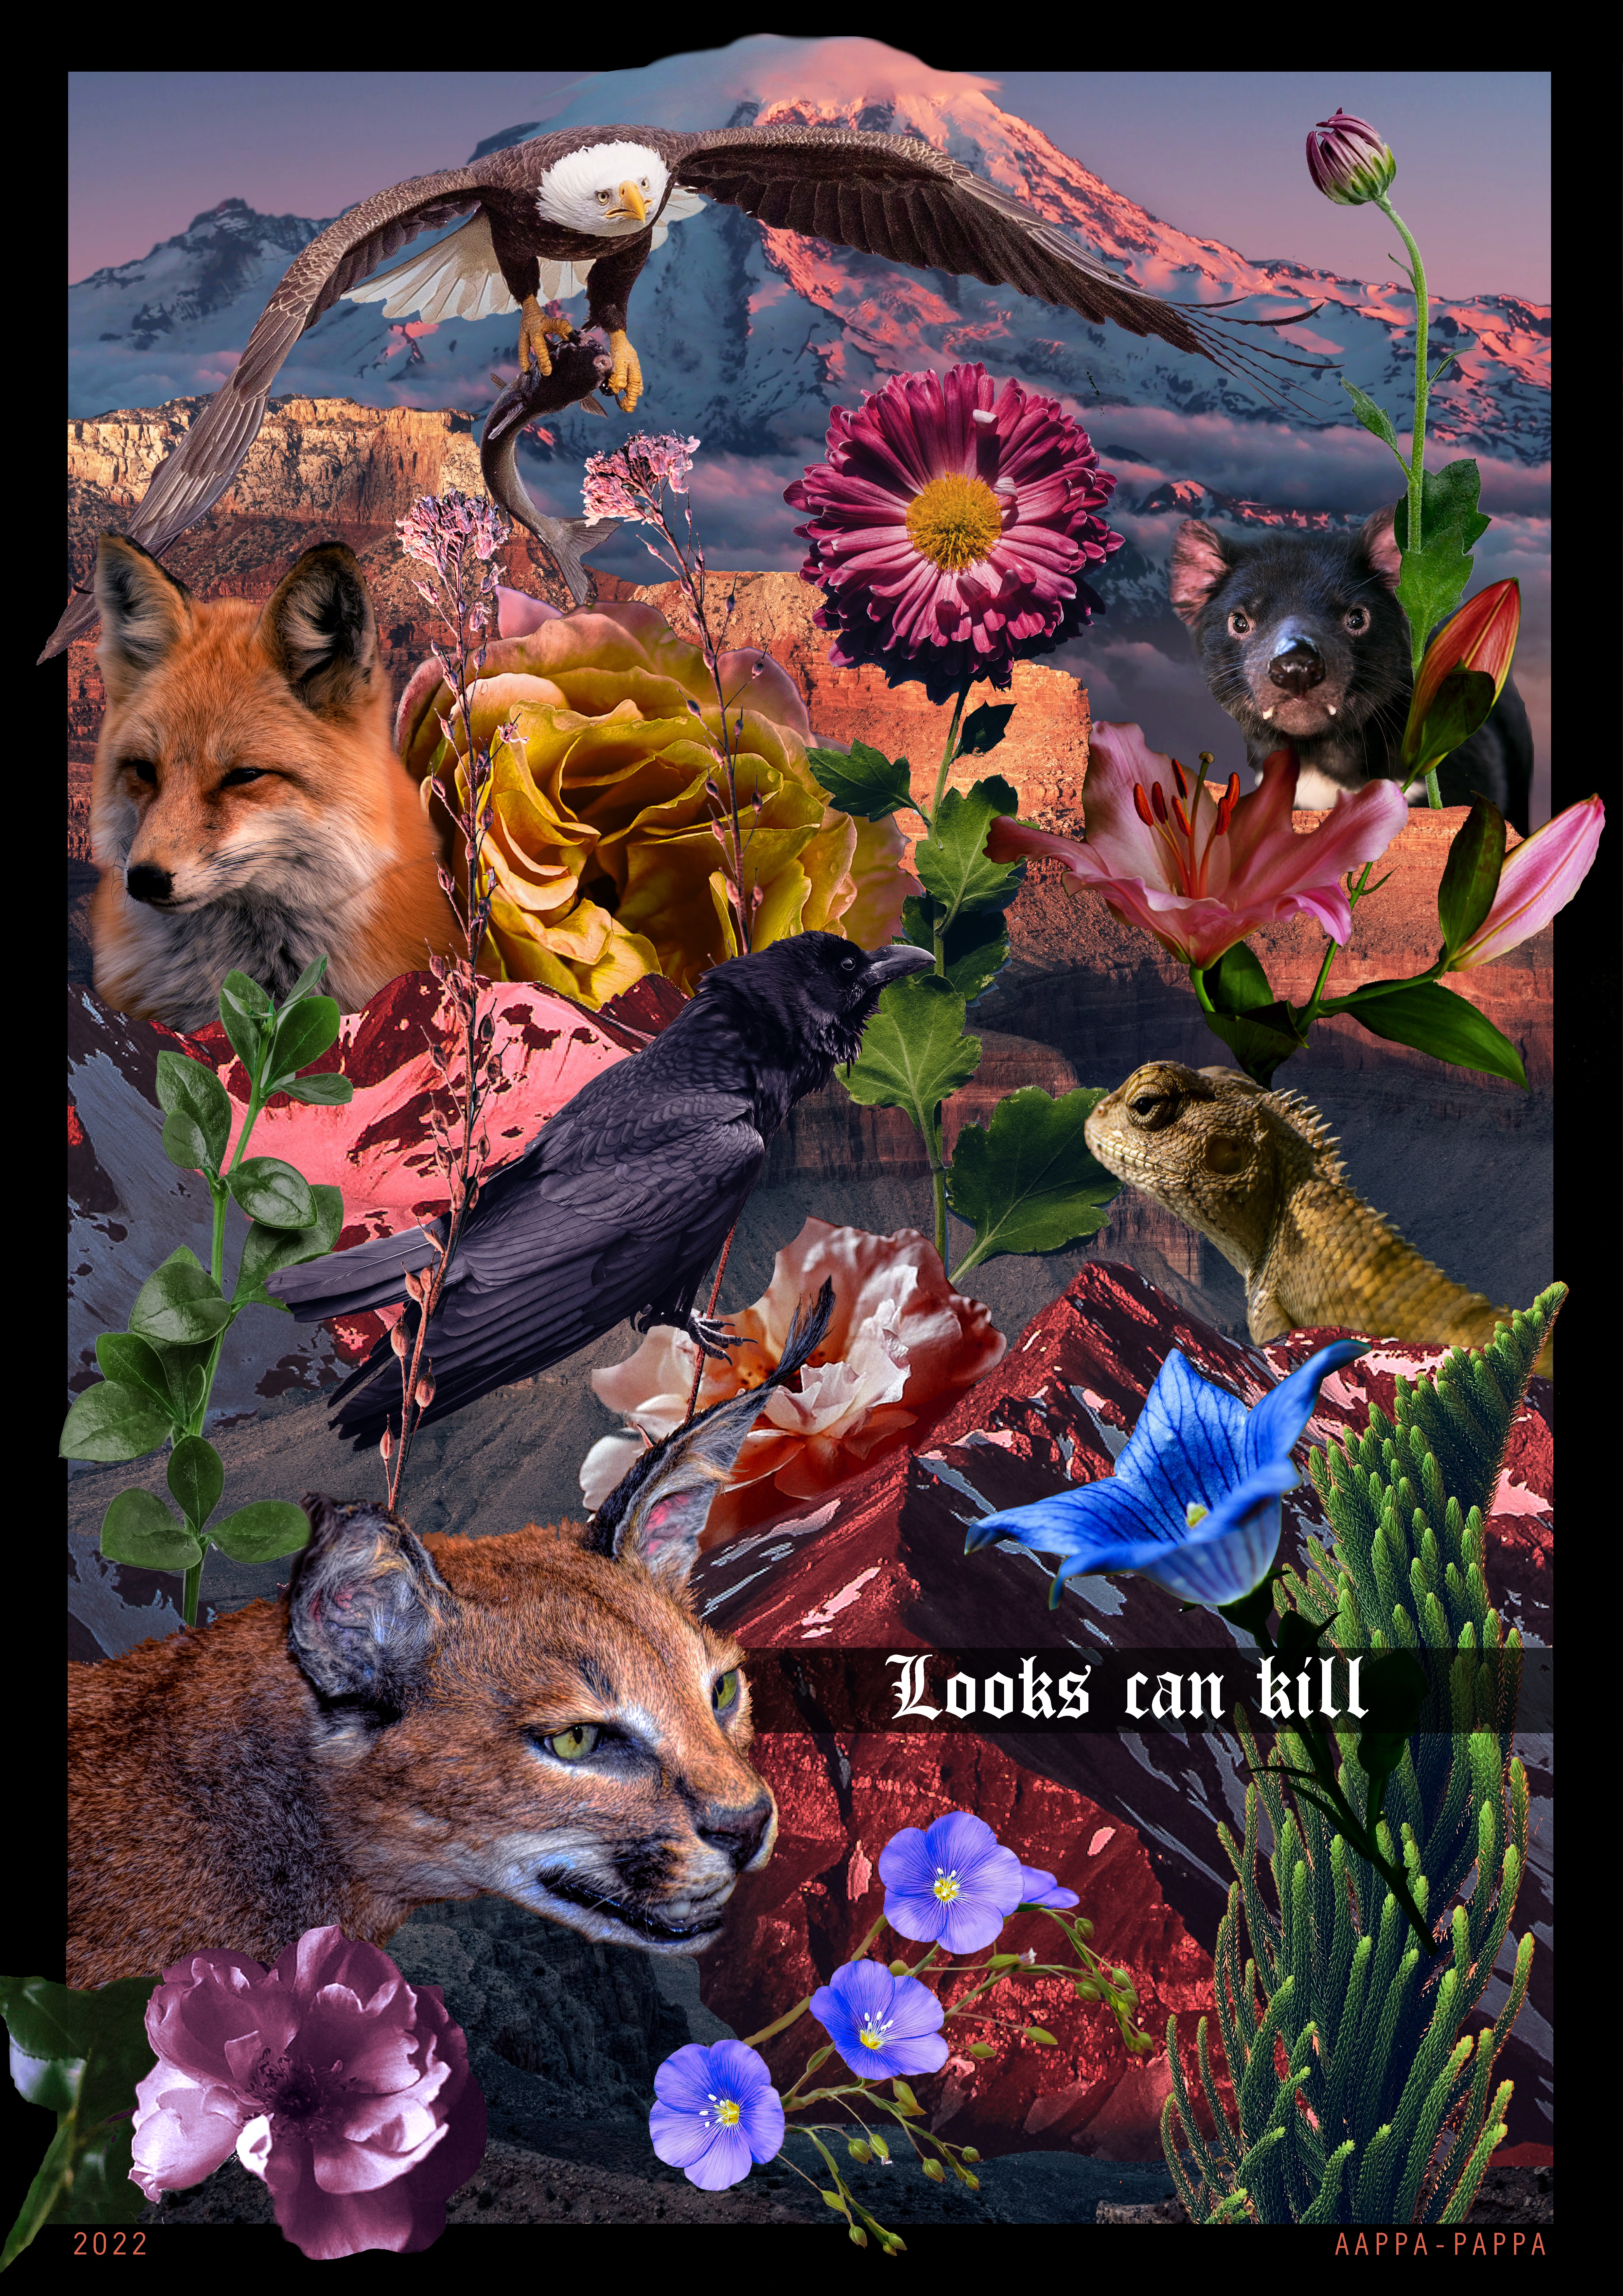 A collage of animals and plants in a desert landscape